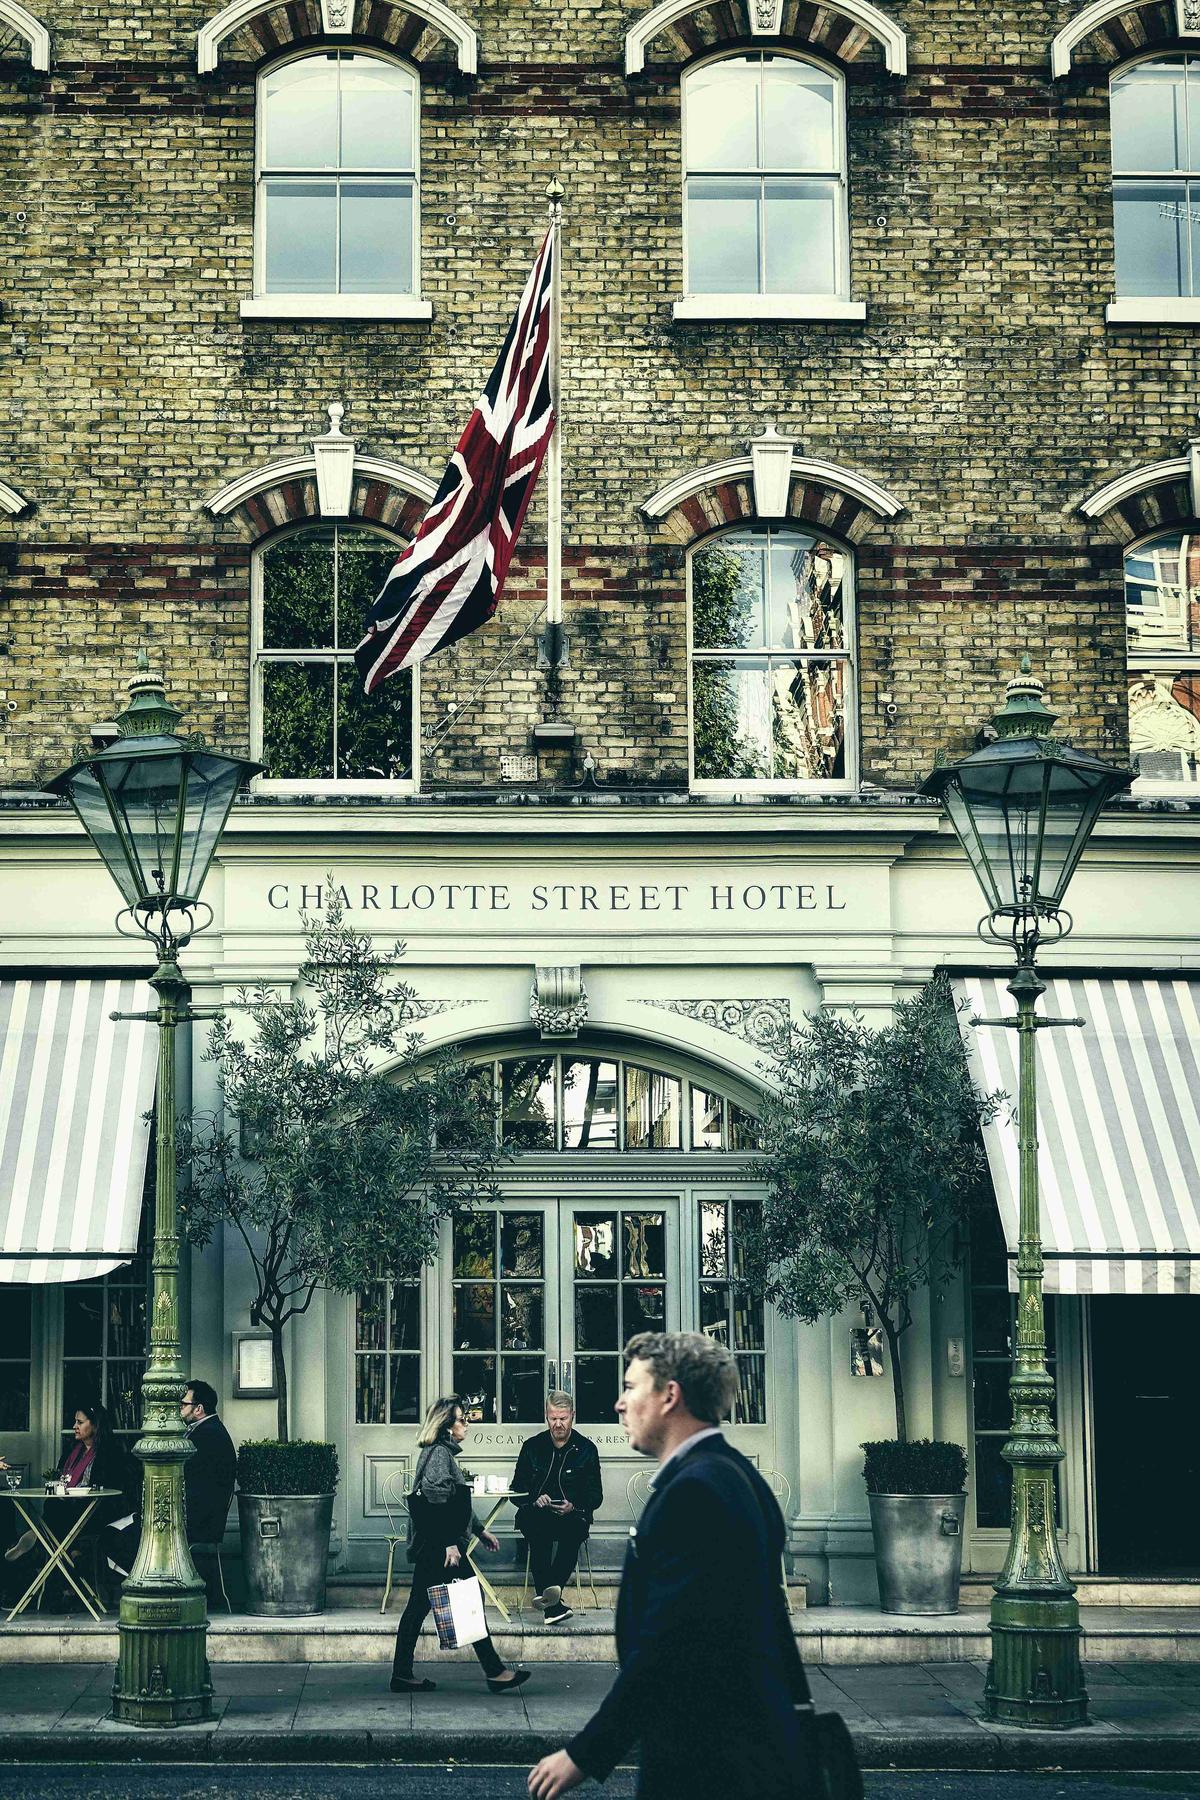 Charlotte Street Hotel Facade with UK Flag London